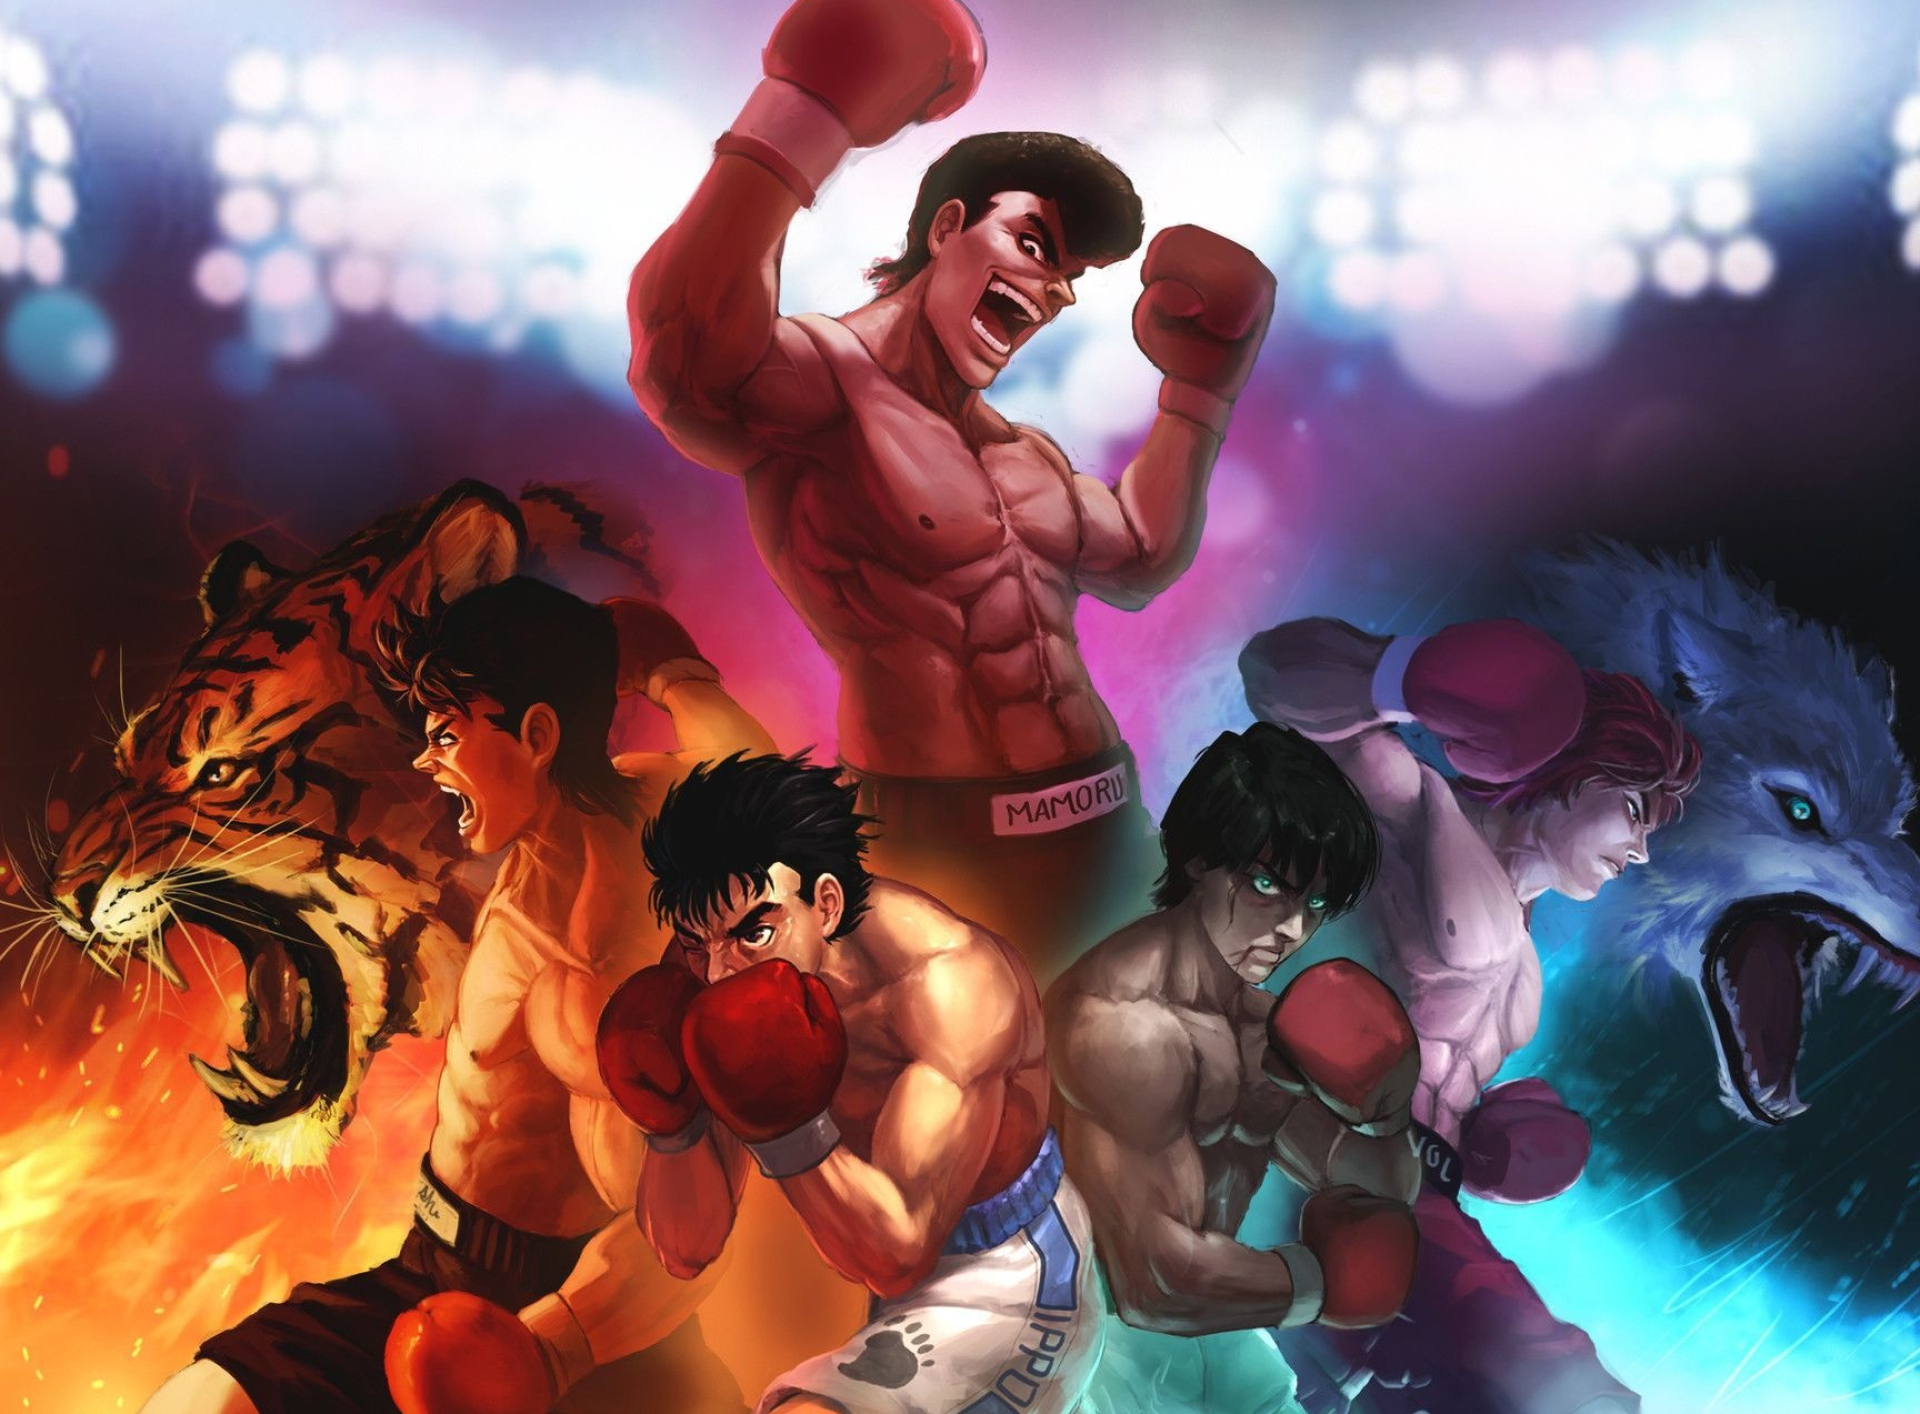 Hajime no Ippo images, Free download, Anime wallpapers, 1920x1080 resolution, 1920x1420 HD Desktop